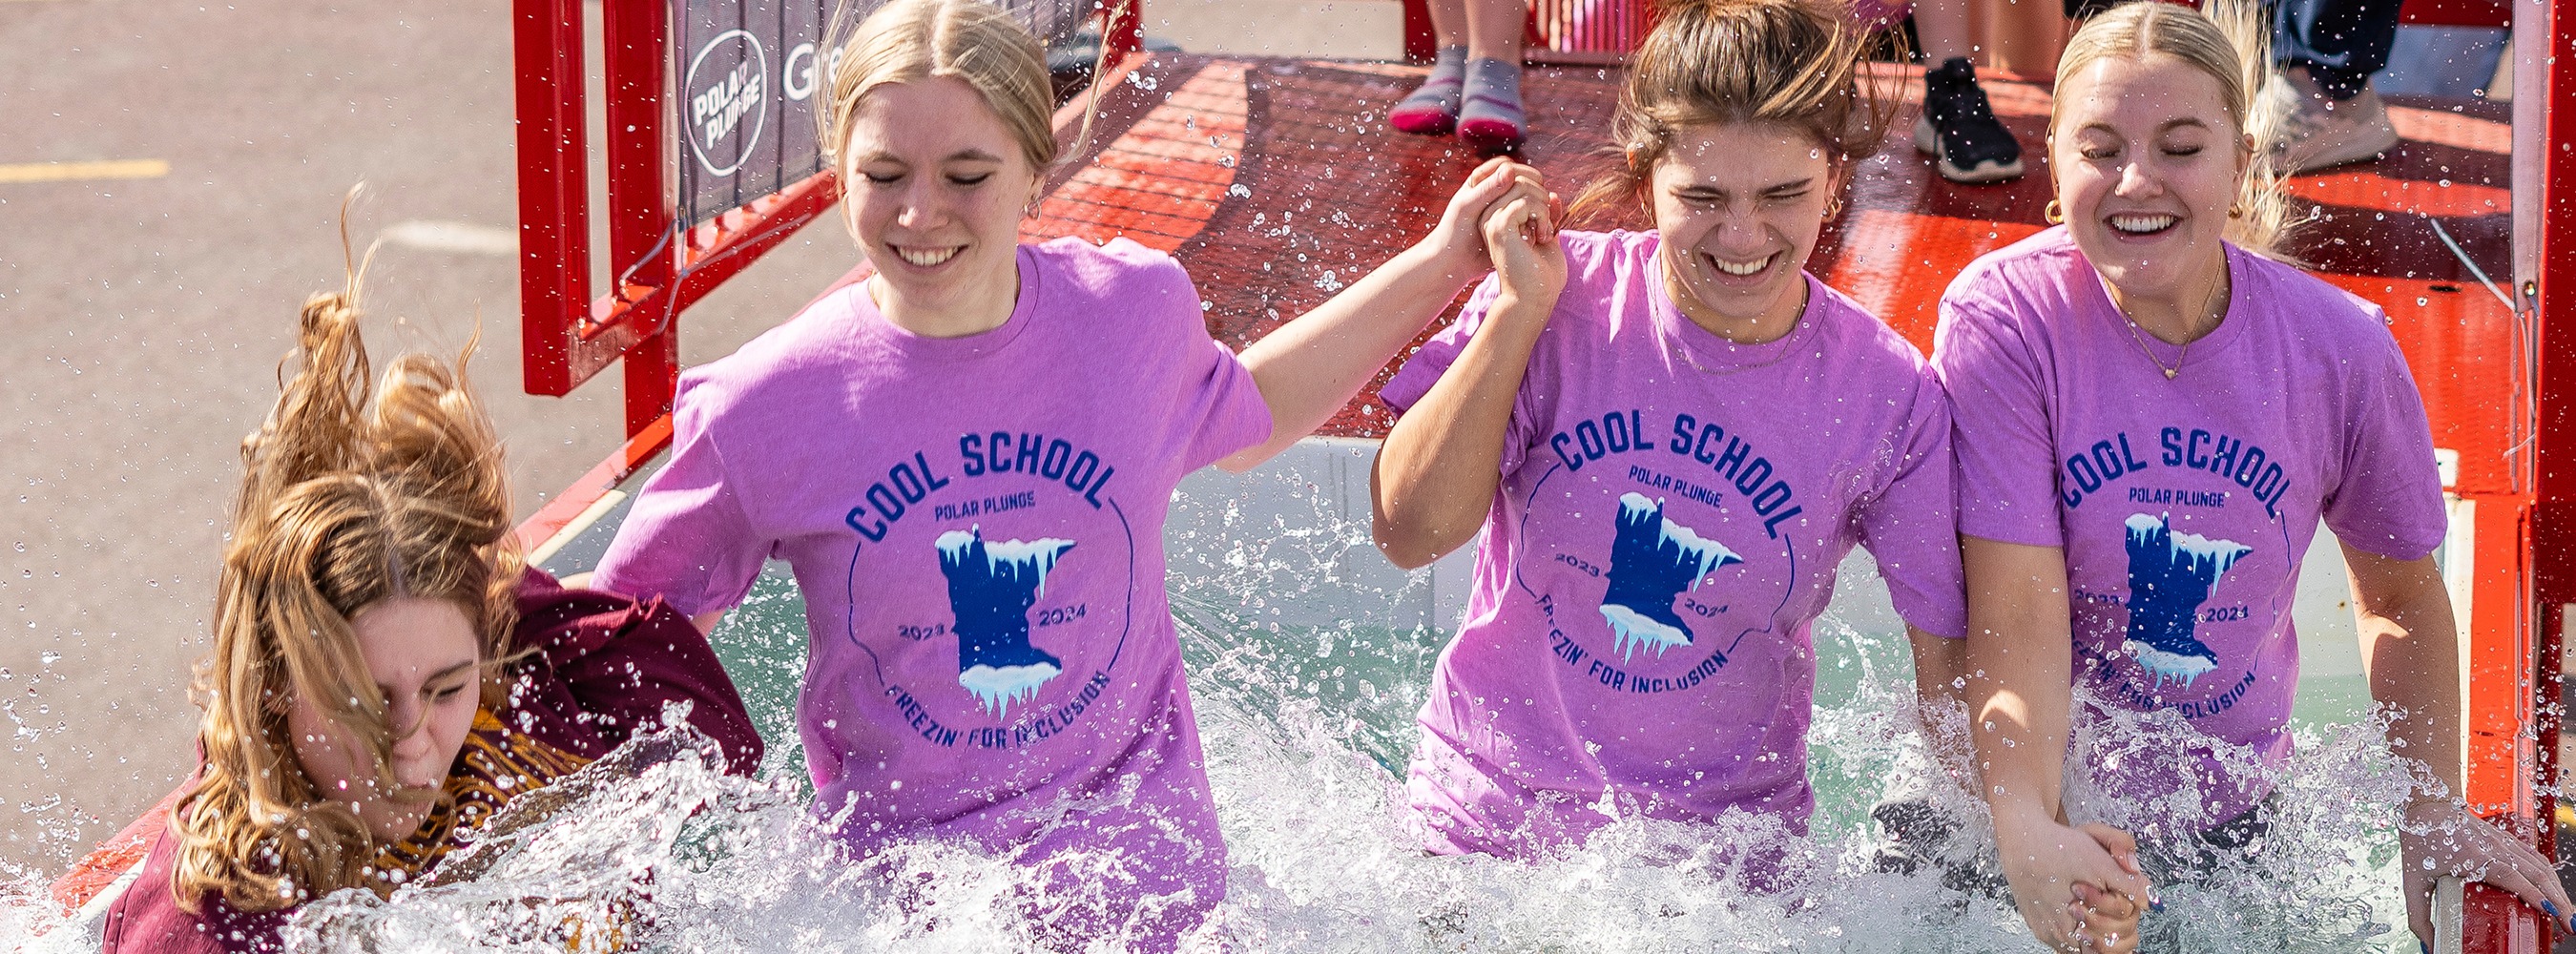 4 Students jumping into the water at a polar plunge event